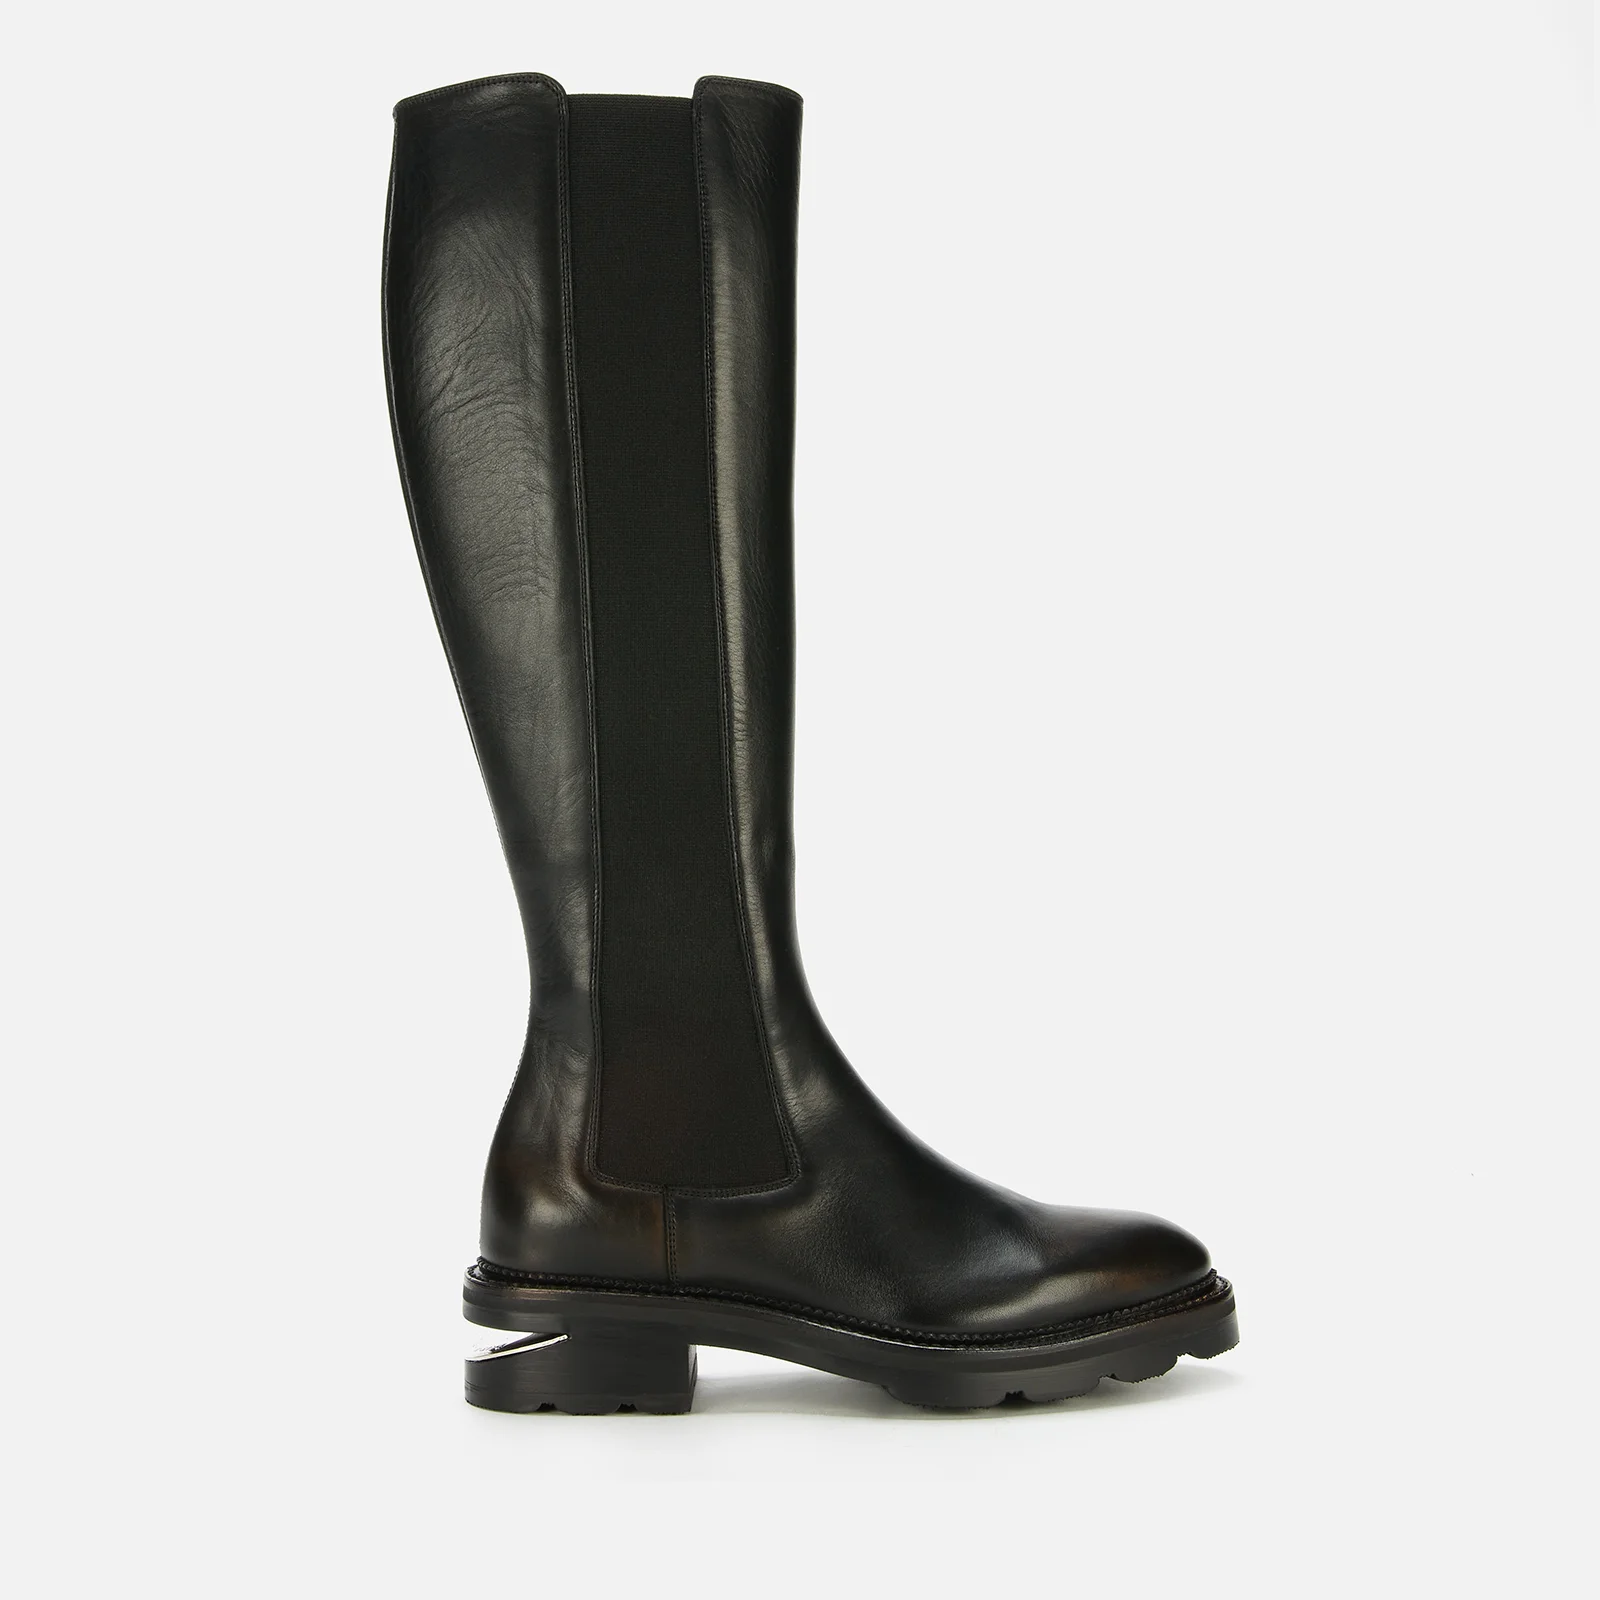 Alexander Wang Women's Andy Leather Knee High Boots - Black Image 1